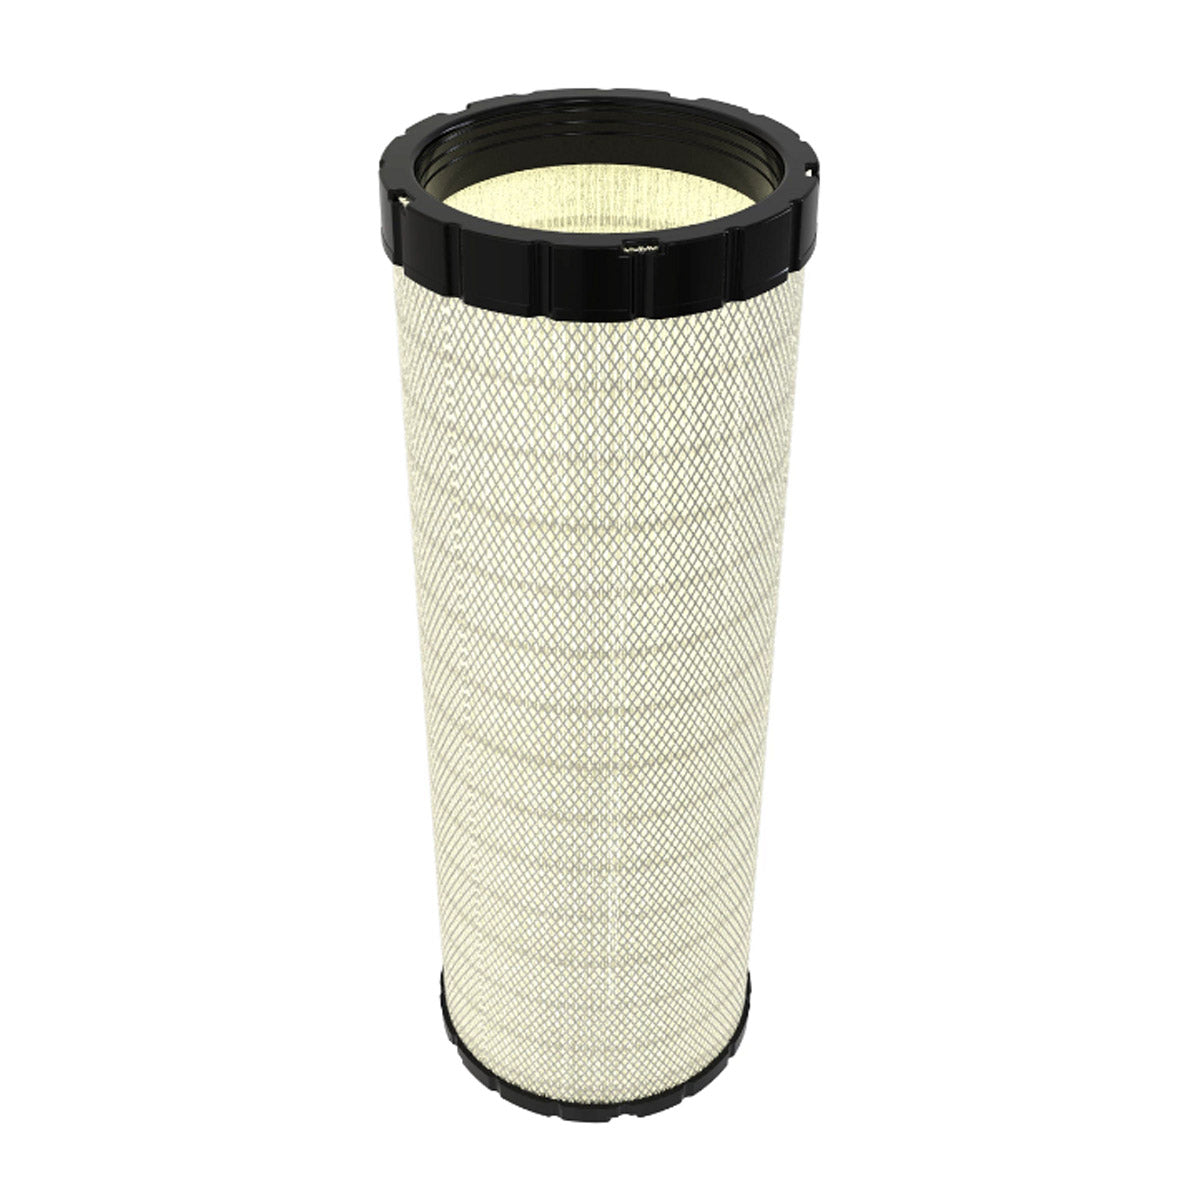 John Deere Primary Air Filter for 4020 Series Compact Utility Tractor - AP33330